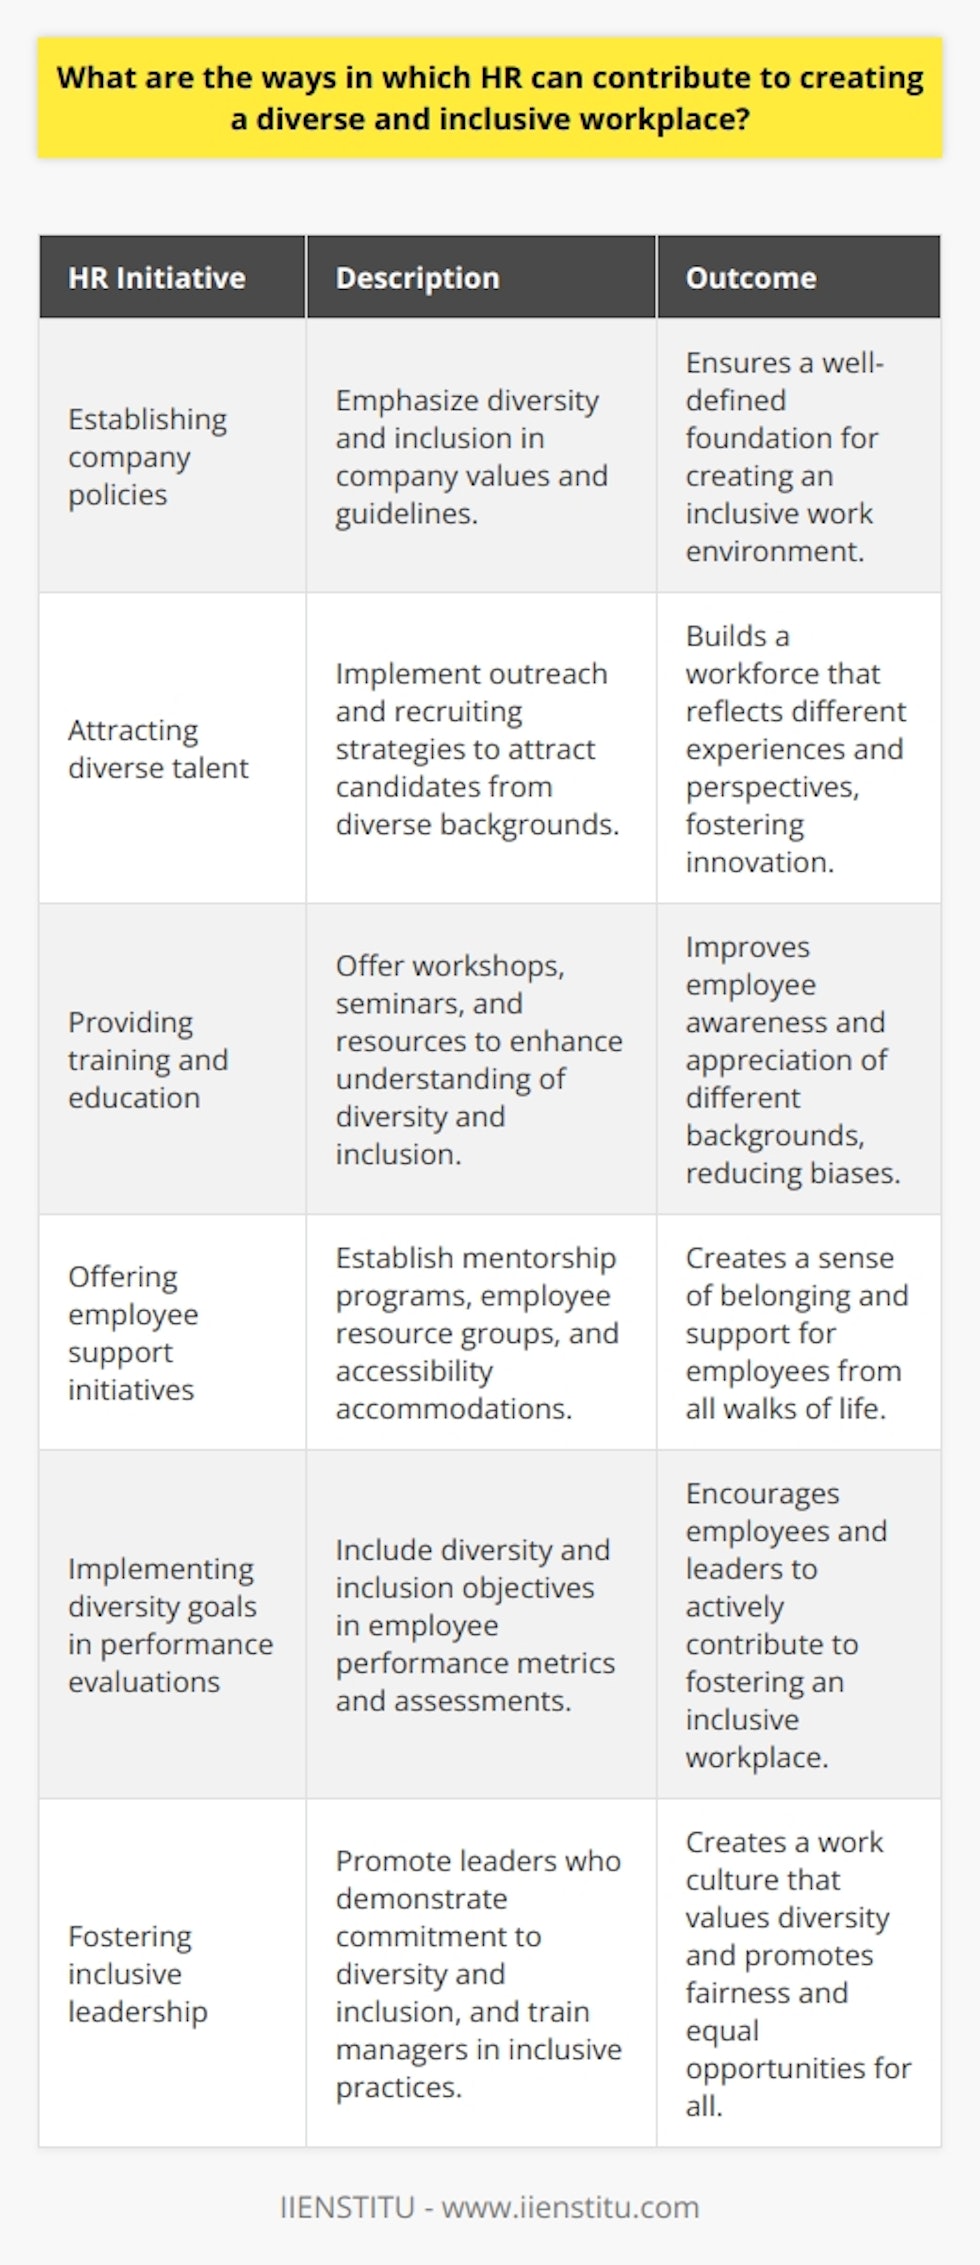 In conclusion, human resources (HR) plays a crucial role in cultivating a diverse and inclusive workplace. By establishing company policies that emphasize diversity and inclusion, attracting diverse talent, providing training and education, offering employee support initiatives, implementing diversity goals in performance evaluations, and fostering inclusive leadership, HR professionals can create an environment where employees of all backgrounds feel welcomed and valued.This, in turn, leads to a thriving organization that benefits from the unique perspectives and experiences that different employees bring to the table, fostering innovation and giving the company a competitive edge in today's global marketplace. Overall, a diverse and inclusive workplace contributes to a more resilient, creative, and productive workforce that can drive the organization's success and growth, and it all starts with the commitment and initiatives led by HR professionals.